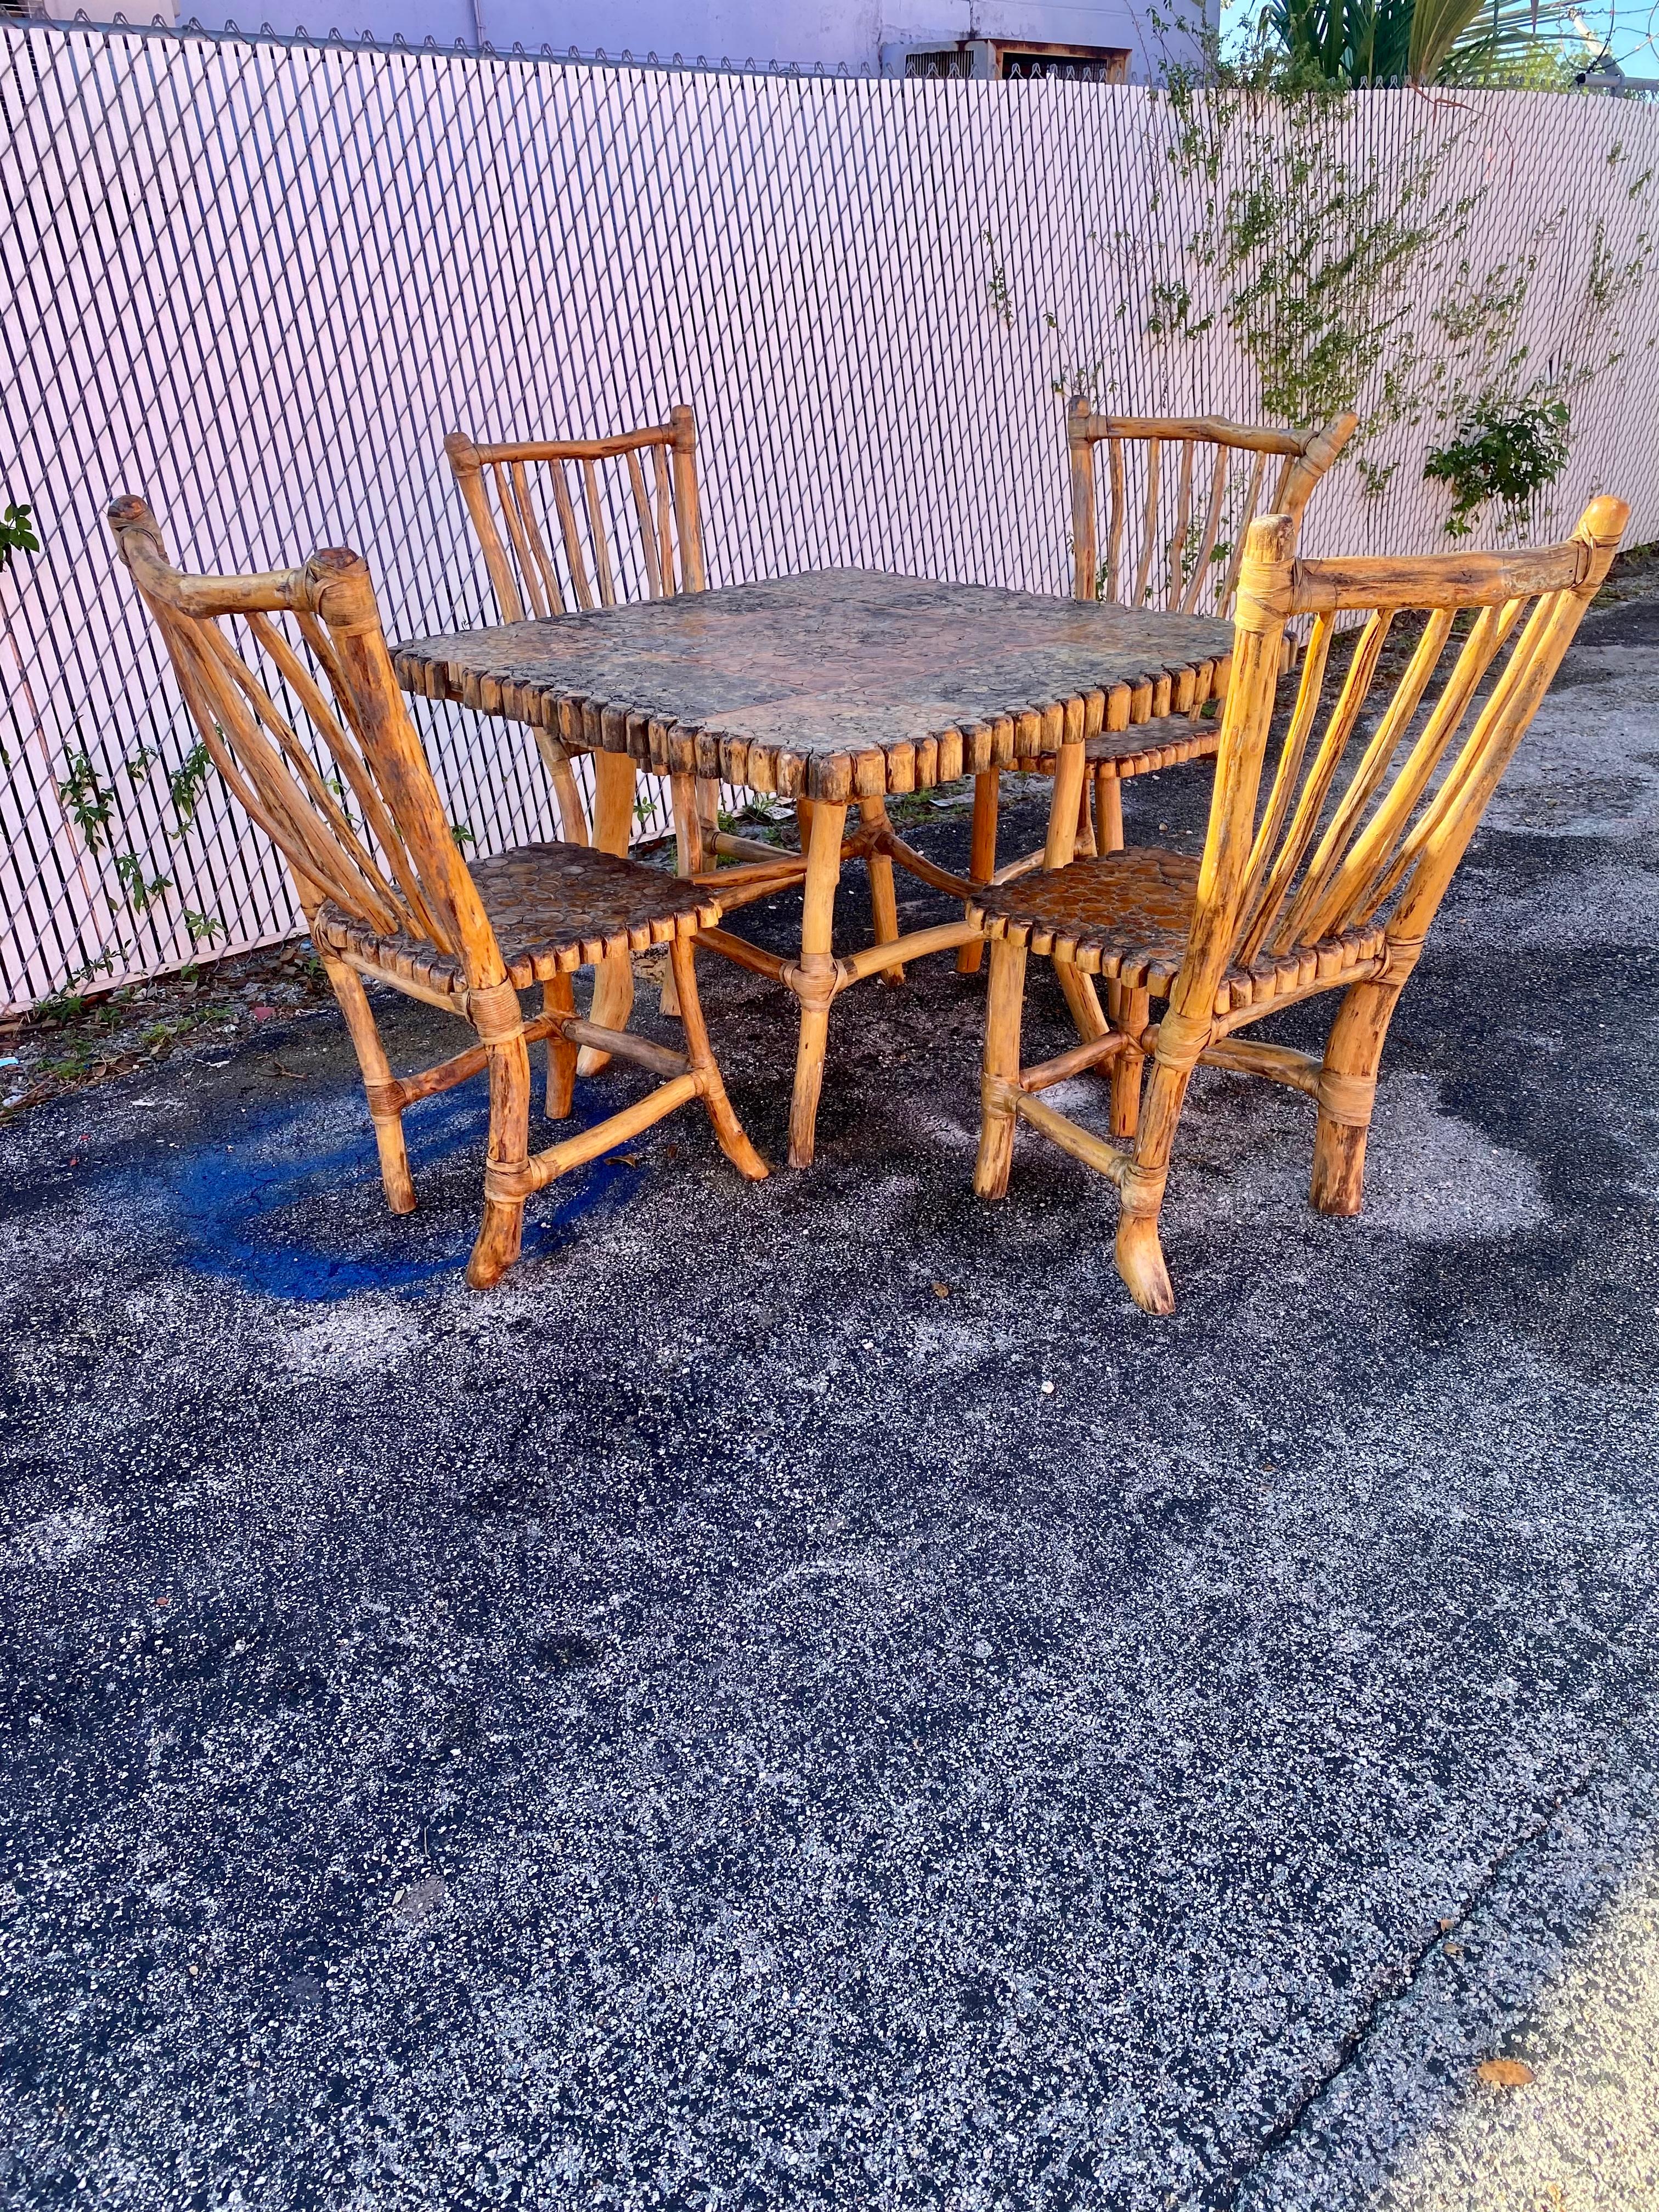 1940s Handcrafted Rattan Sticks Sculptural Dining Set, Set of 5 In Good Condition For Sale In Fort Lauderdale, FL